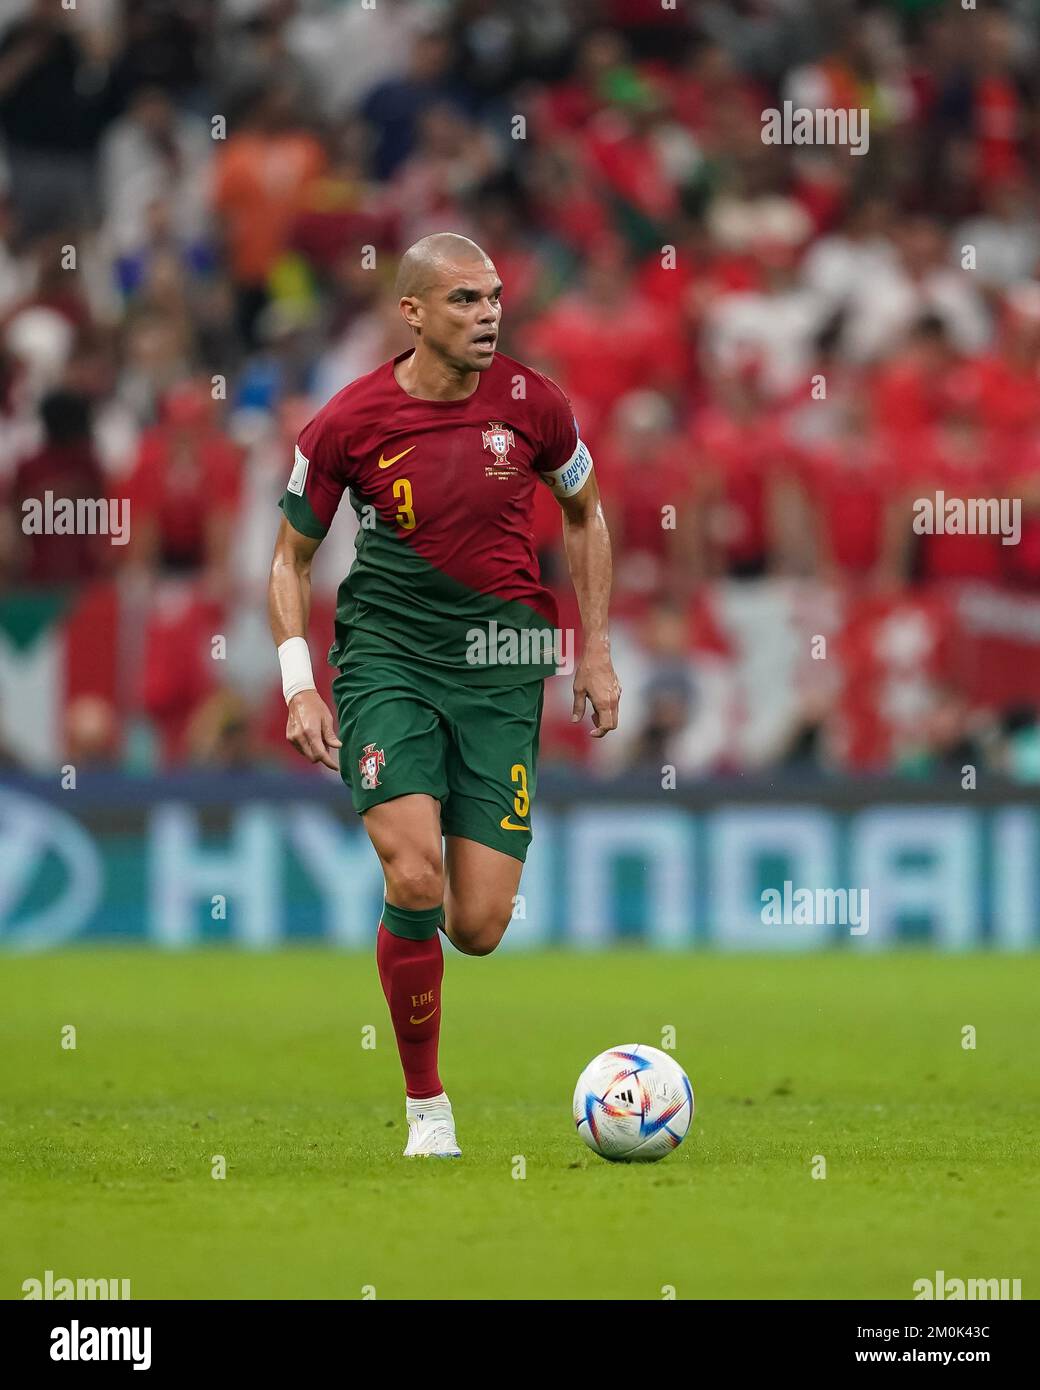 LUSAIL, QATAR - DECEMBER 6: Player of Portugal Pepe drives the ball during the FIFA World Cup Qatar 2022 Round of 16 match between Portugal and Switzerland at Lusail Stadium on December 6, 2022 in Lusail, Qatar. (Photo by Florencia Tan Jun/PxImages) Stock Photo